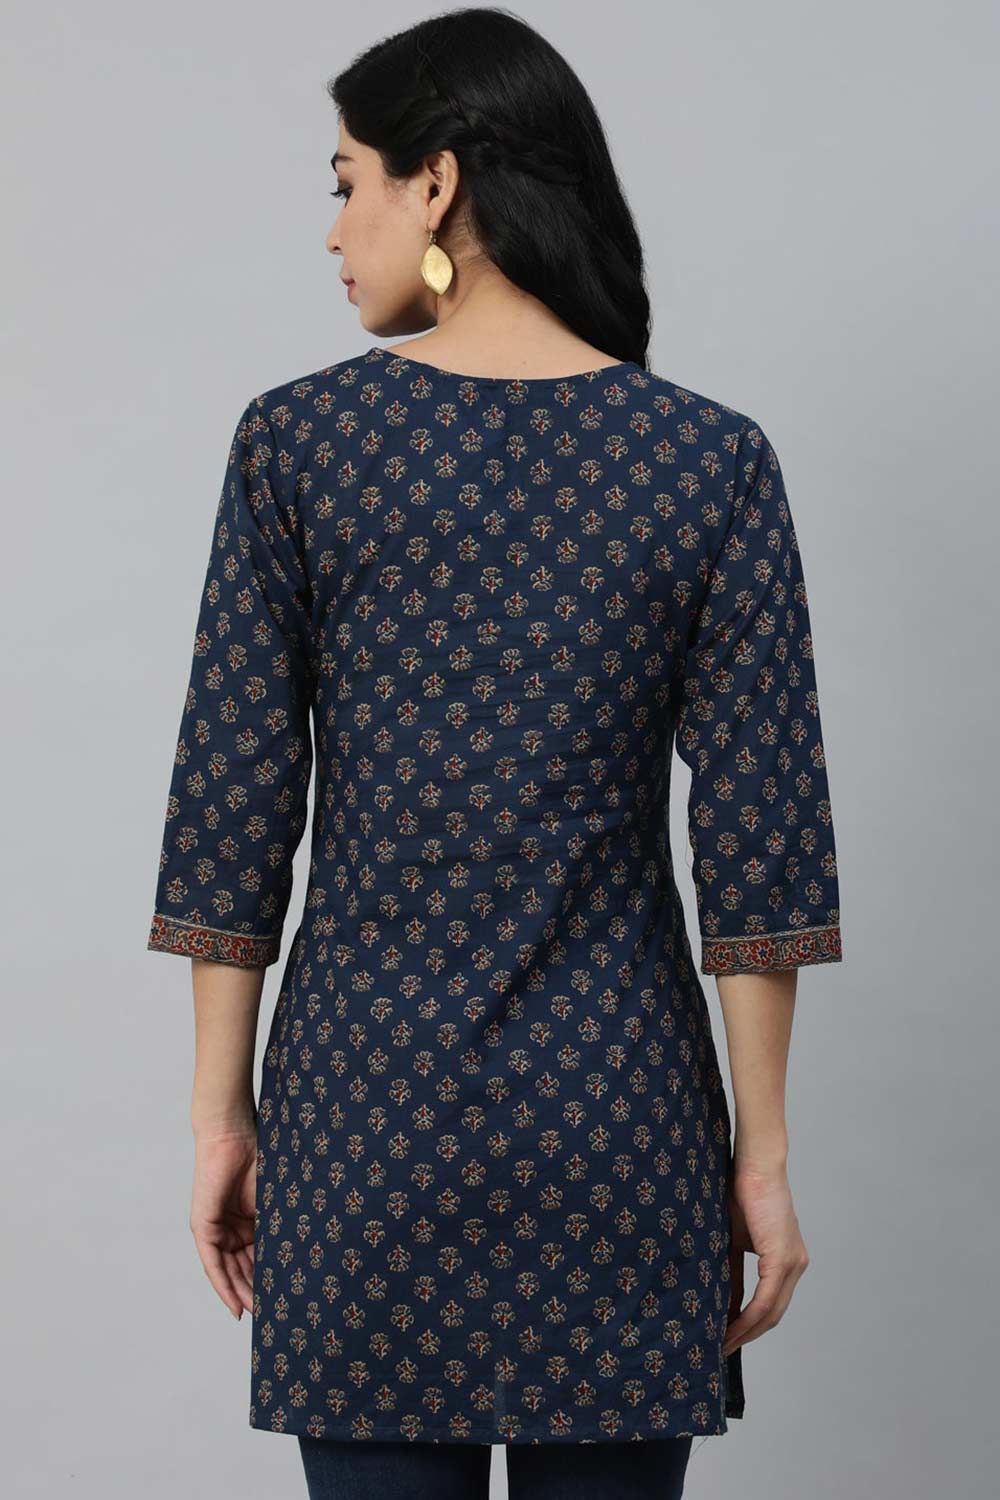 Buy Navy Blue And Marron Cotton Floral Printed Straight Tunic Online - Side